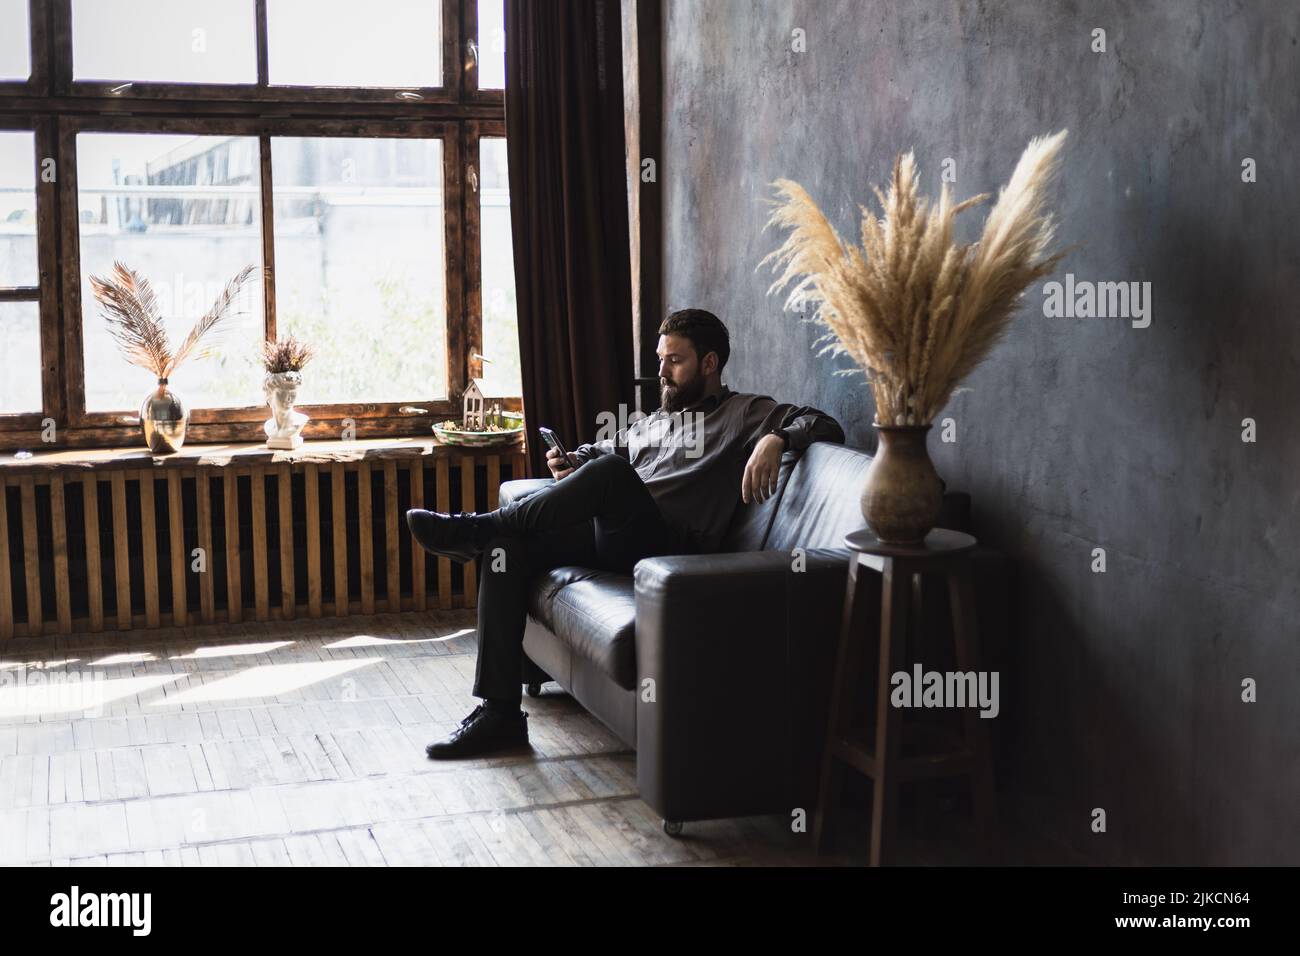 A man with a beard and a smartphone is sitting on a leather sofa. Stock Photo